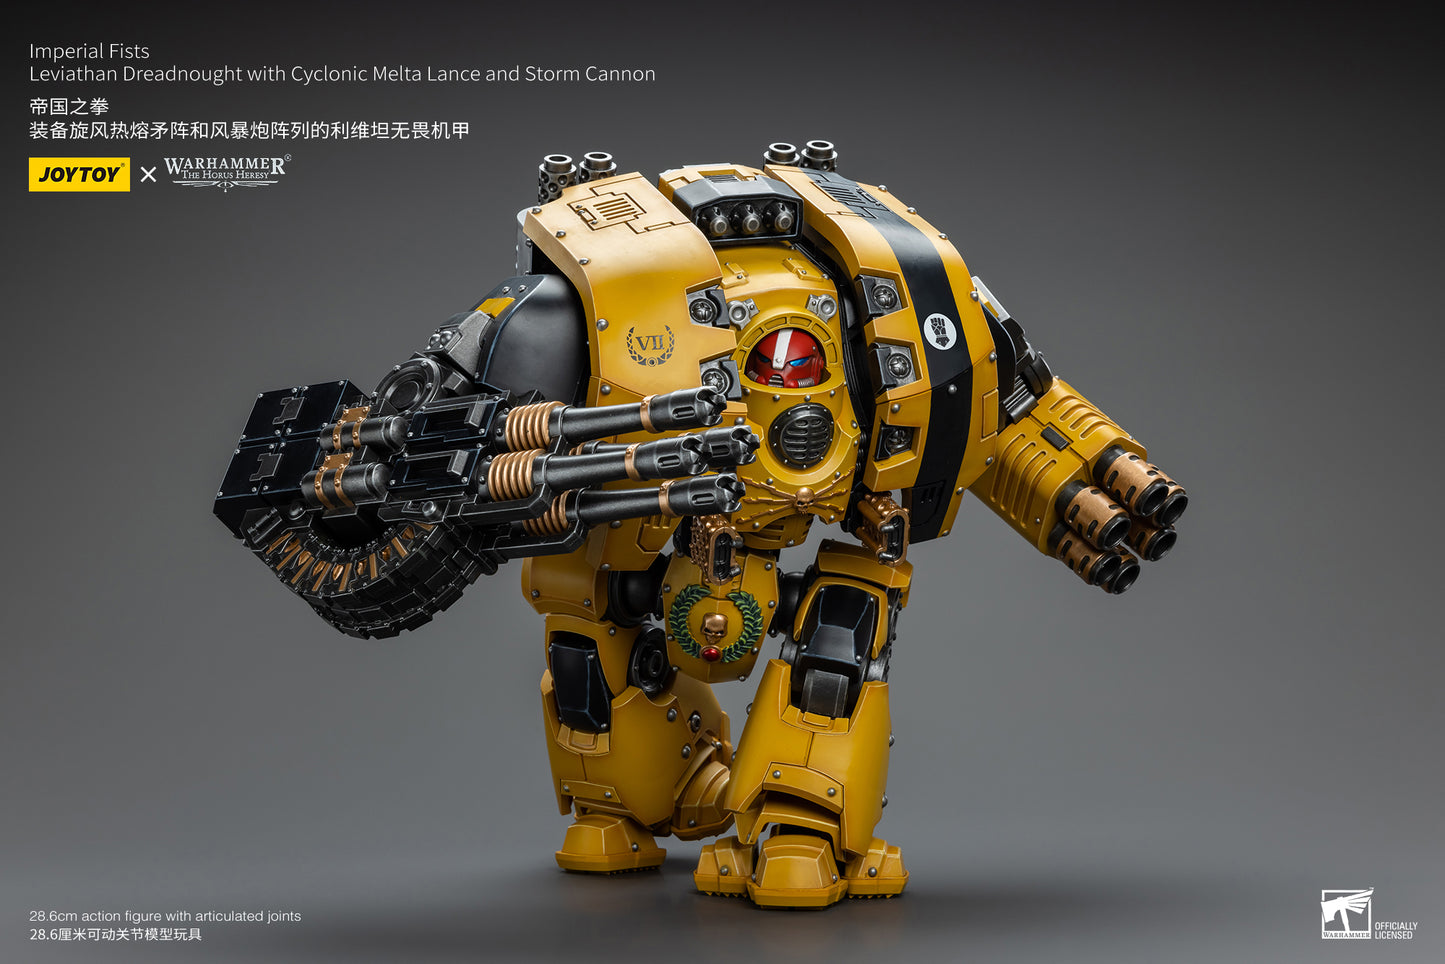 (Pre-Order) Warhammer Imperial Fists Leviathan Dreadnought with Cyclonic Melta Lance and Storm Cannon